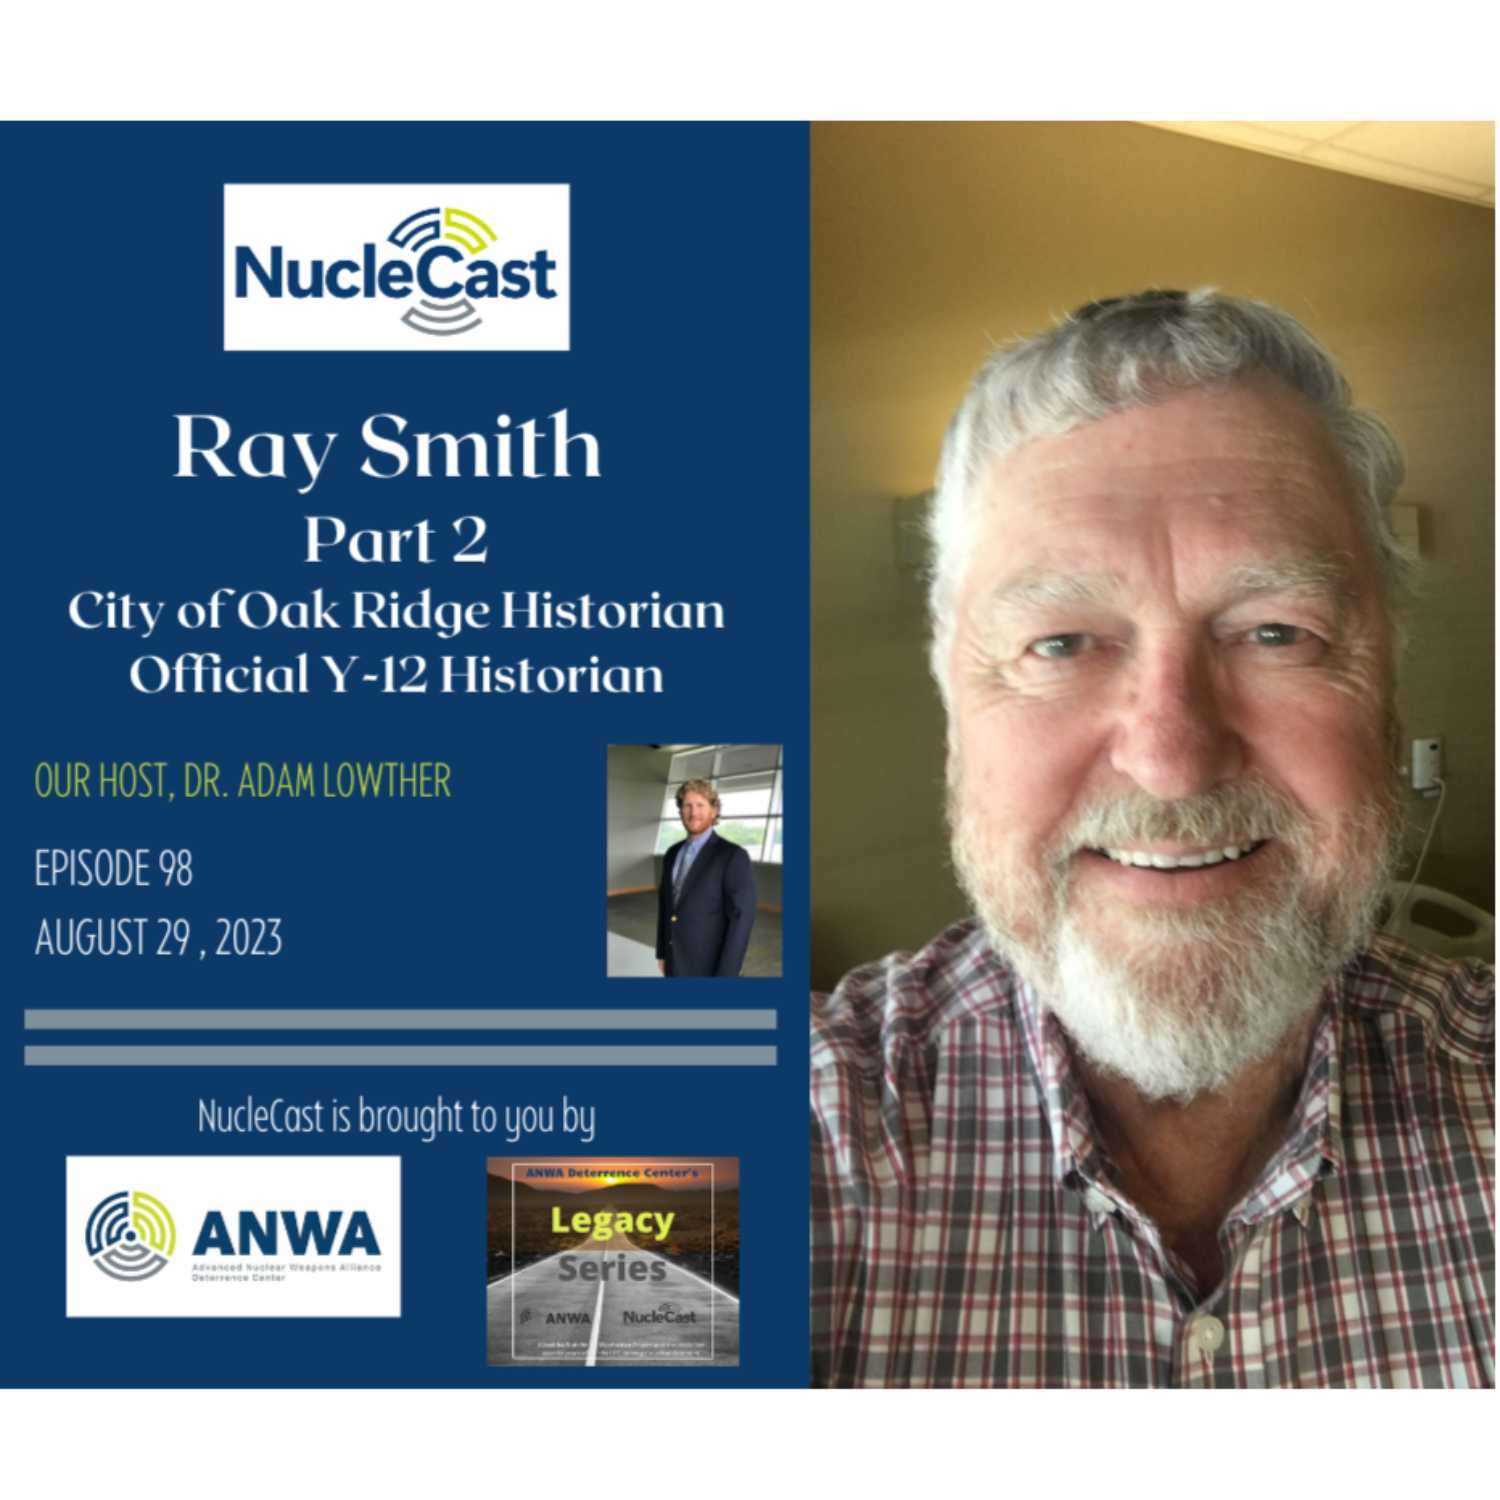 Ray Smith (Part 2) - The History of Oak Ridge and Y-12 to Present Day